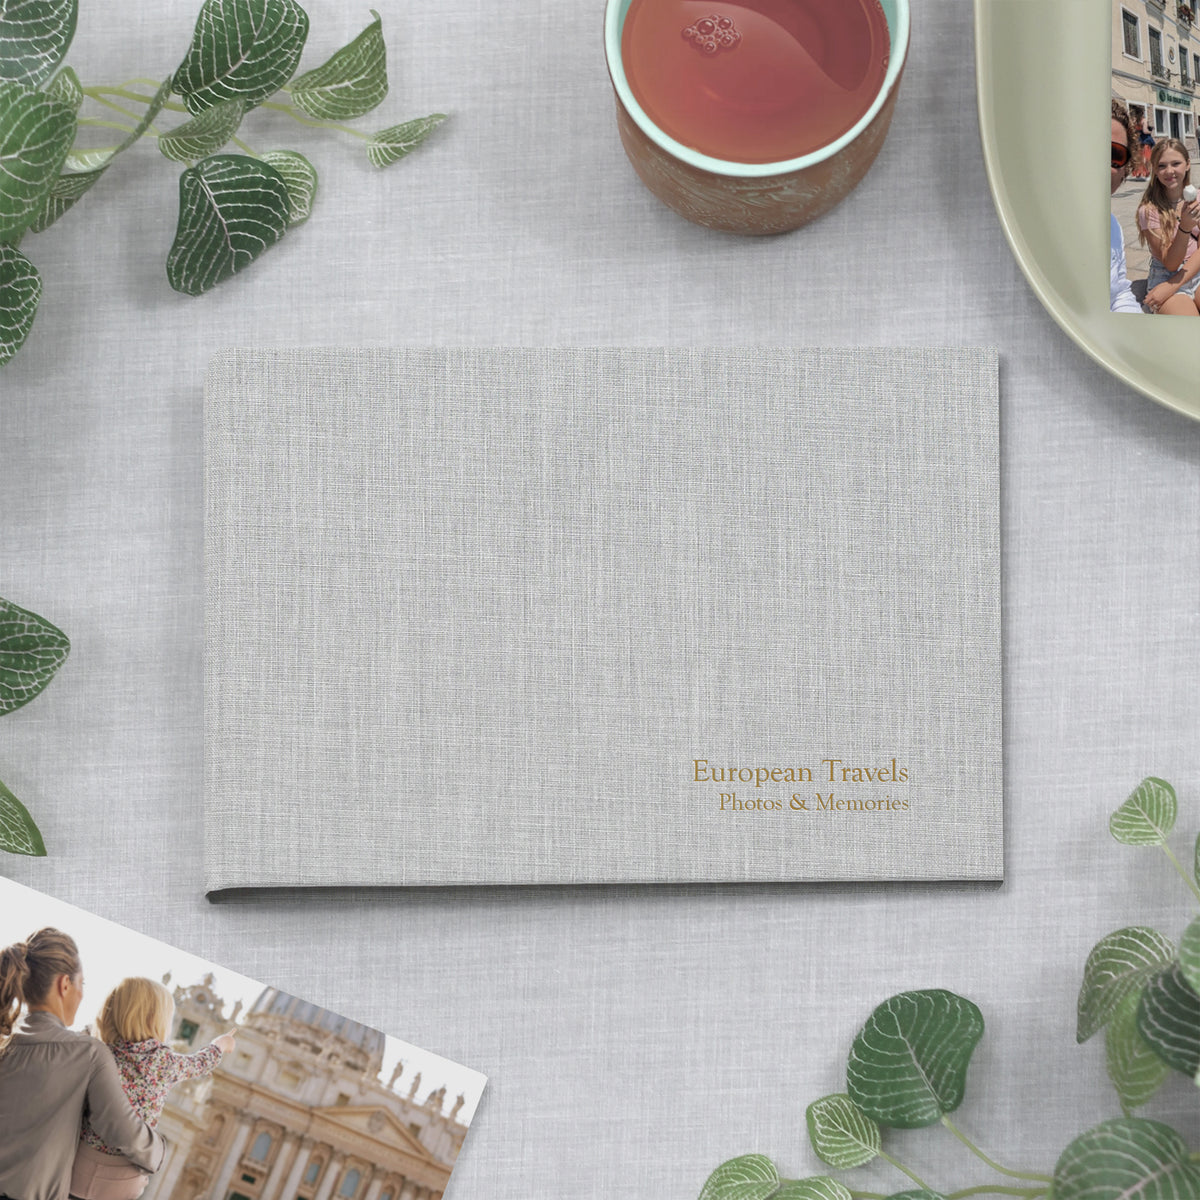 Small Photo Binder | for 5x7 Photos | with Dove Gray Linen